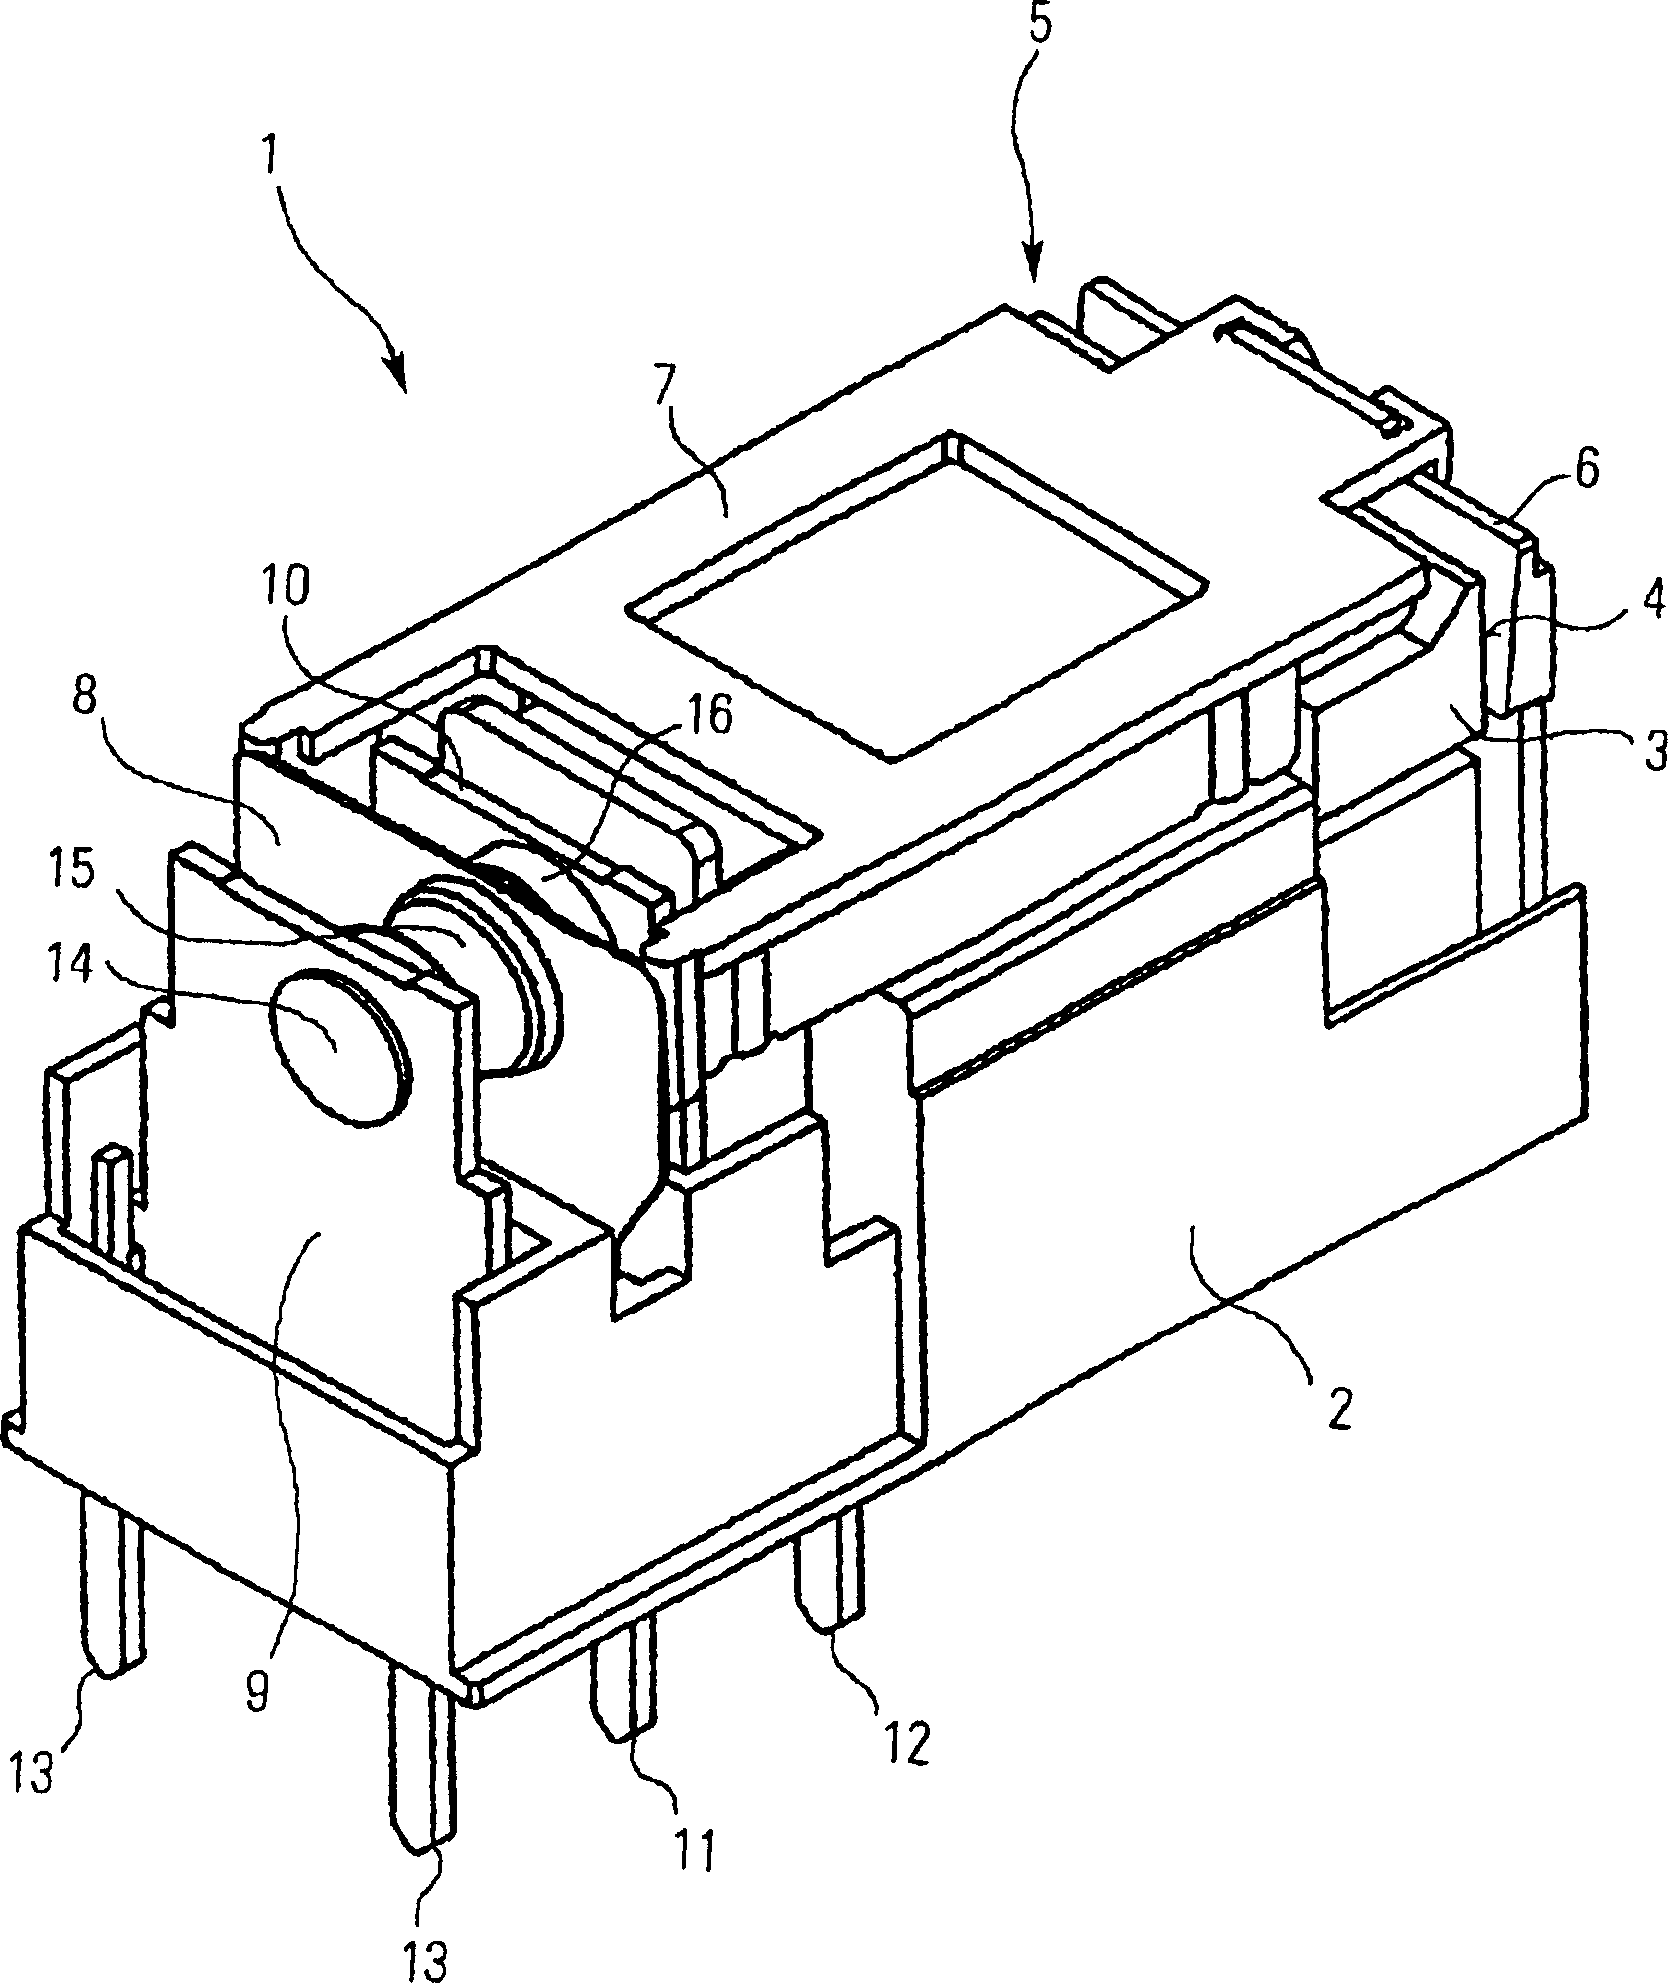 Relay with a core having an enlarged cross-section